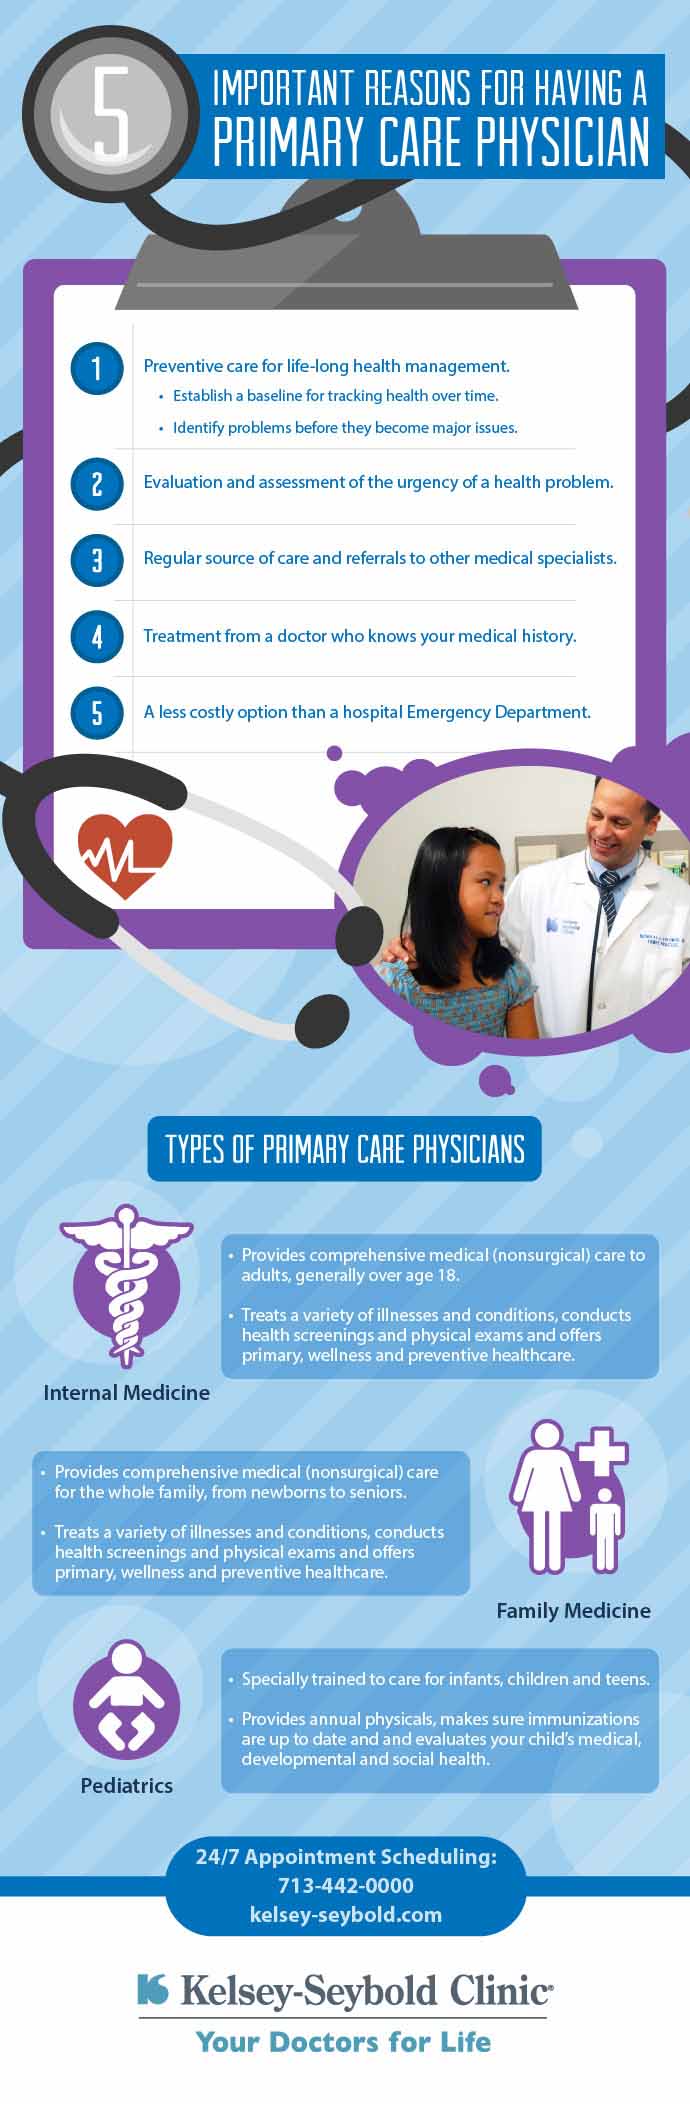 5 important reasons for having a primary care physician